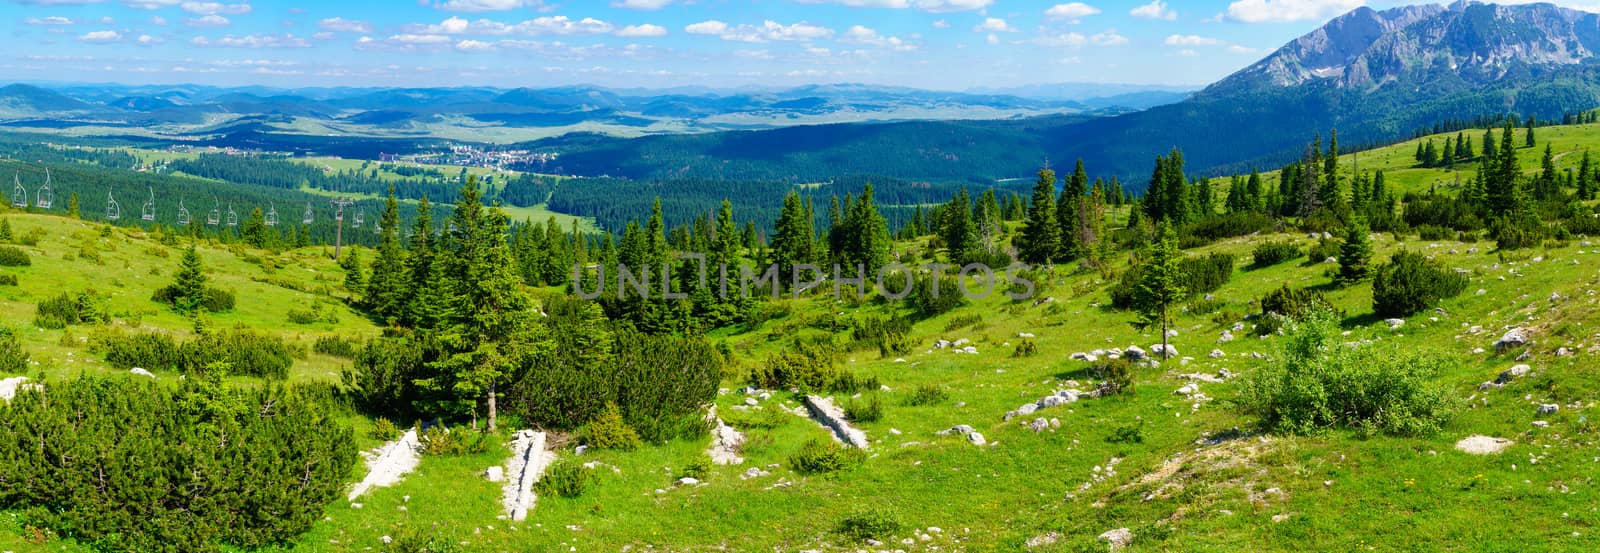 Durmitor Landscape and ski Lift by RnDmS